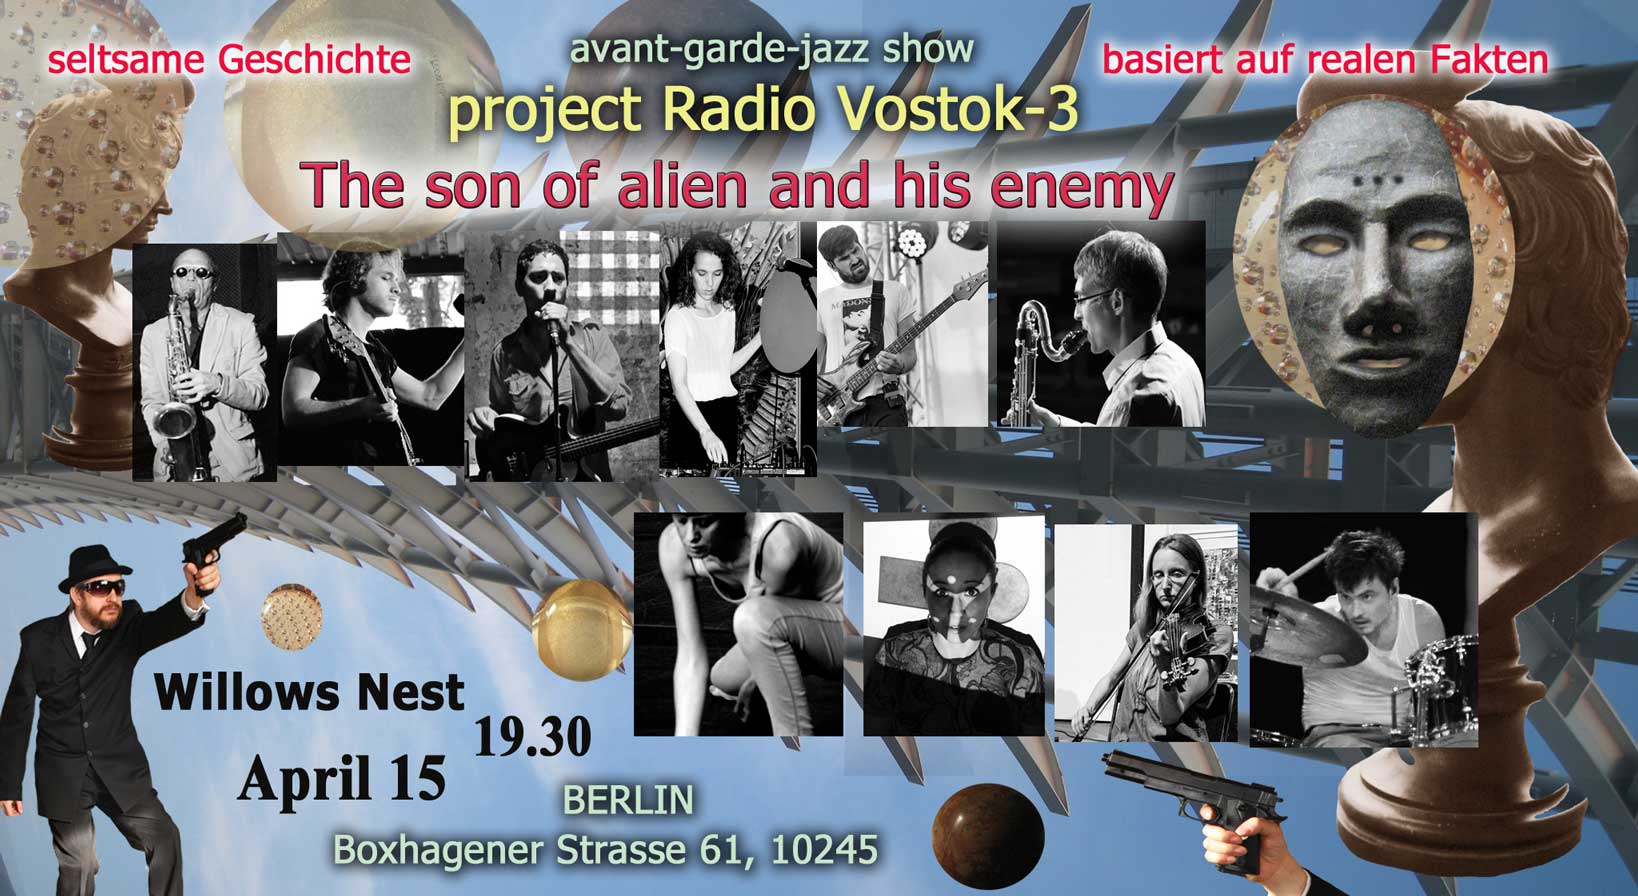 Radio Vostok-3 Presents: "Son of an alien and his enemy"